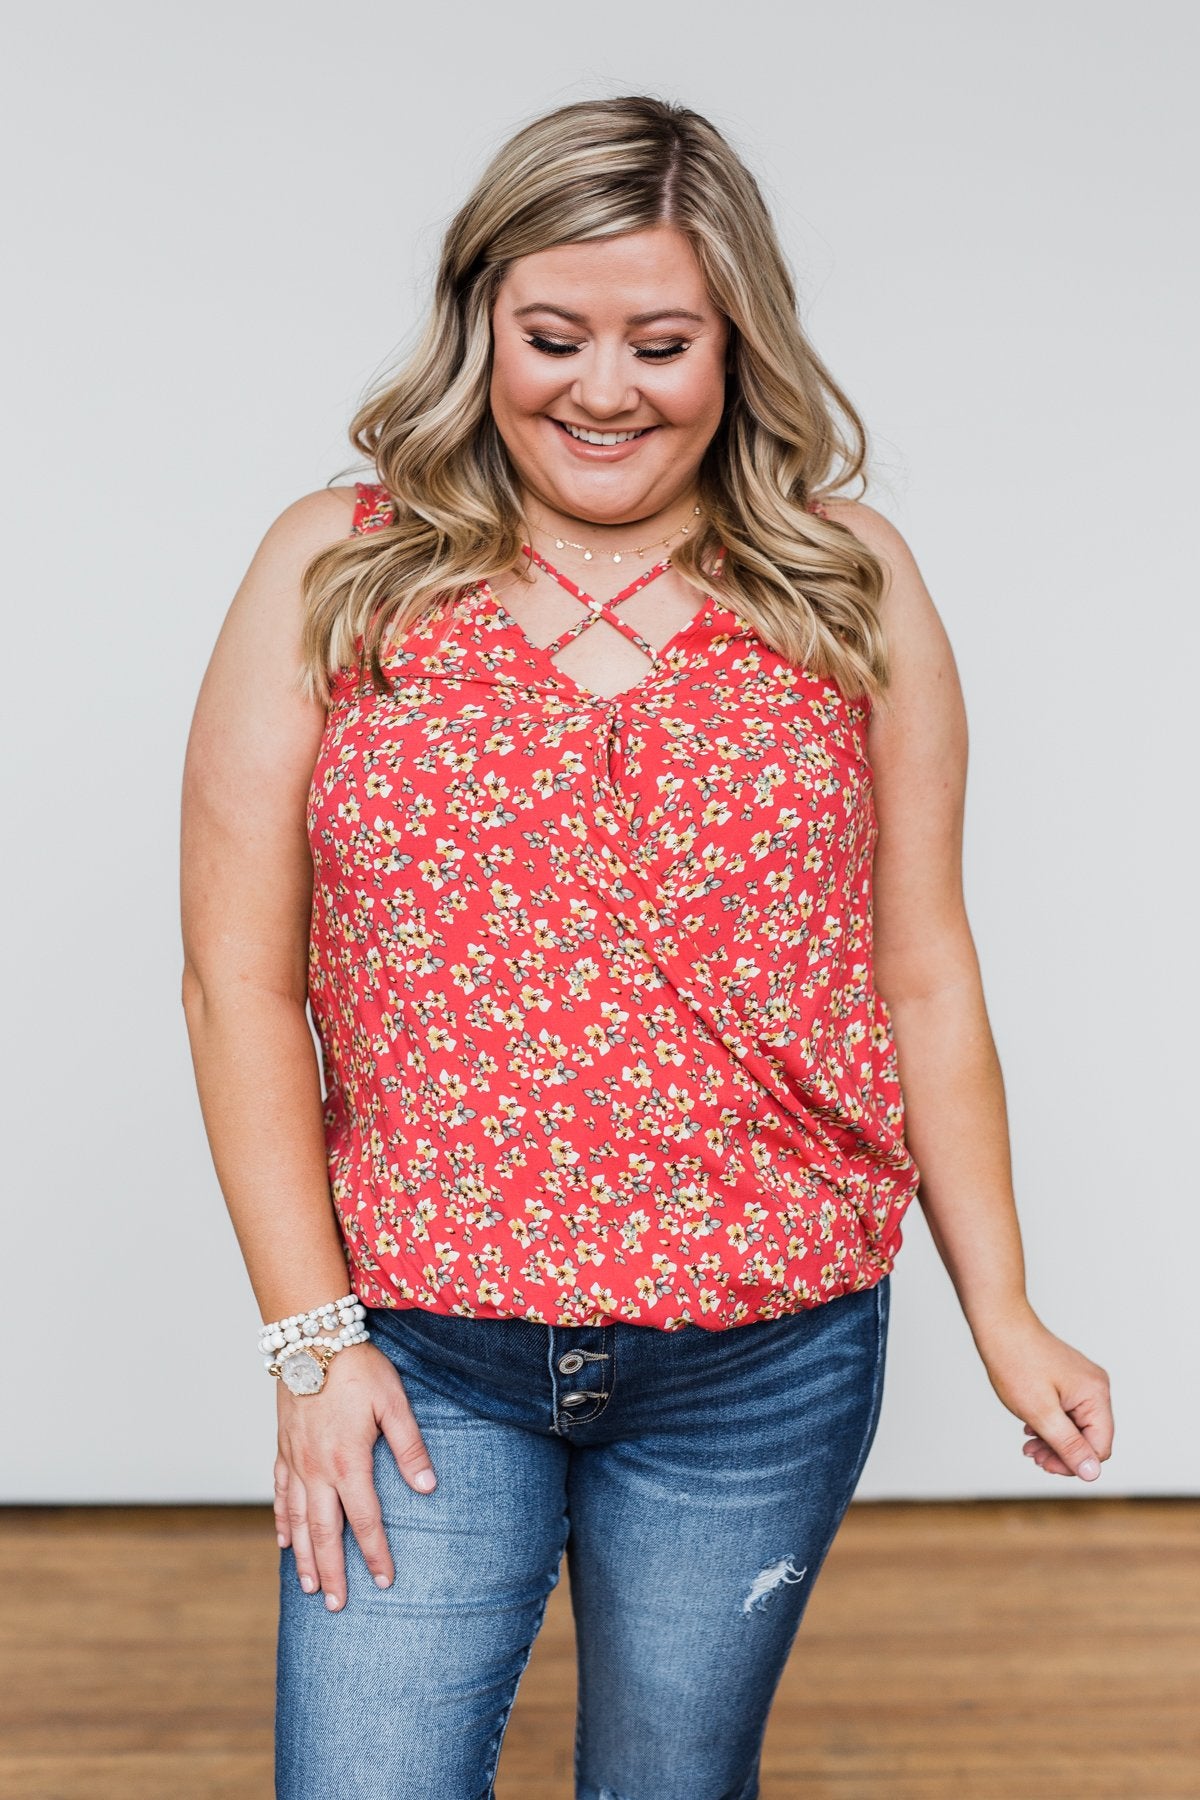 Knowing You Floral Wrap Tank Top- Coral